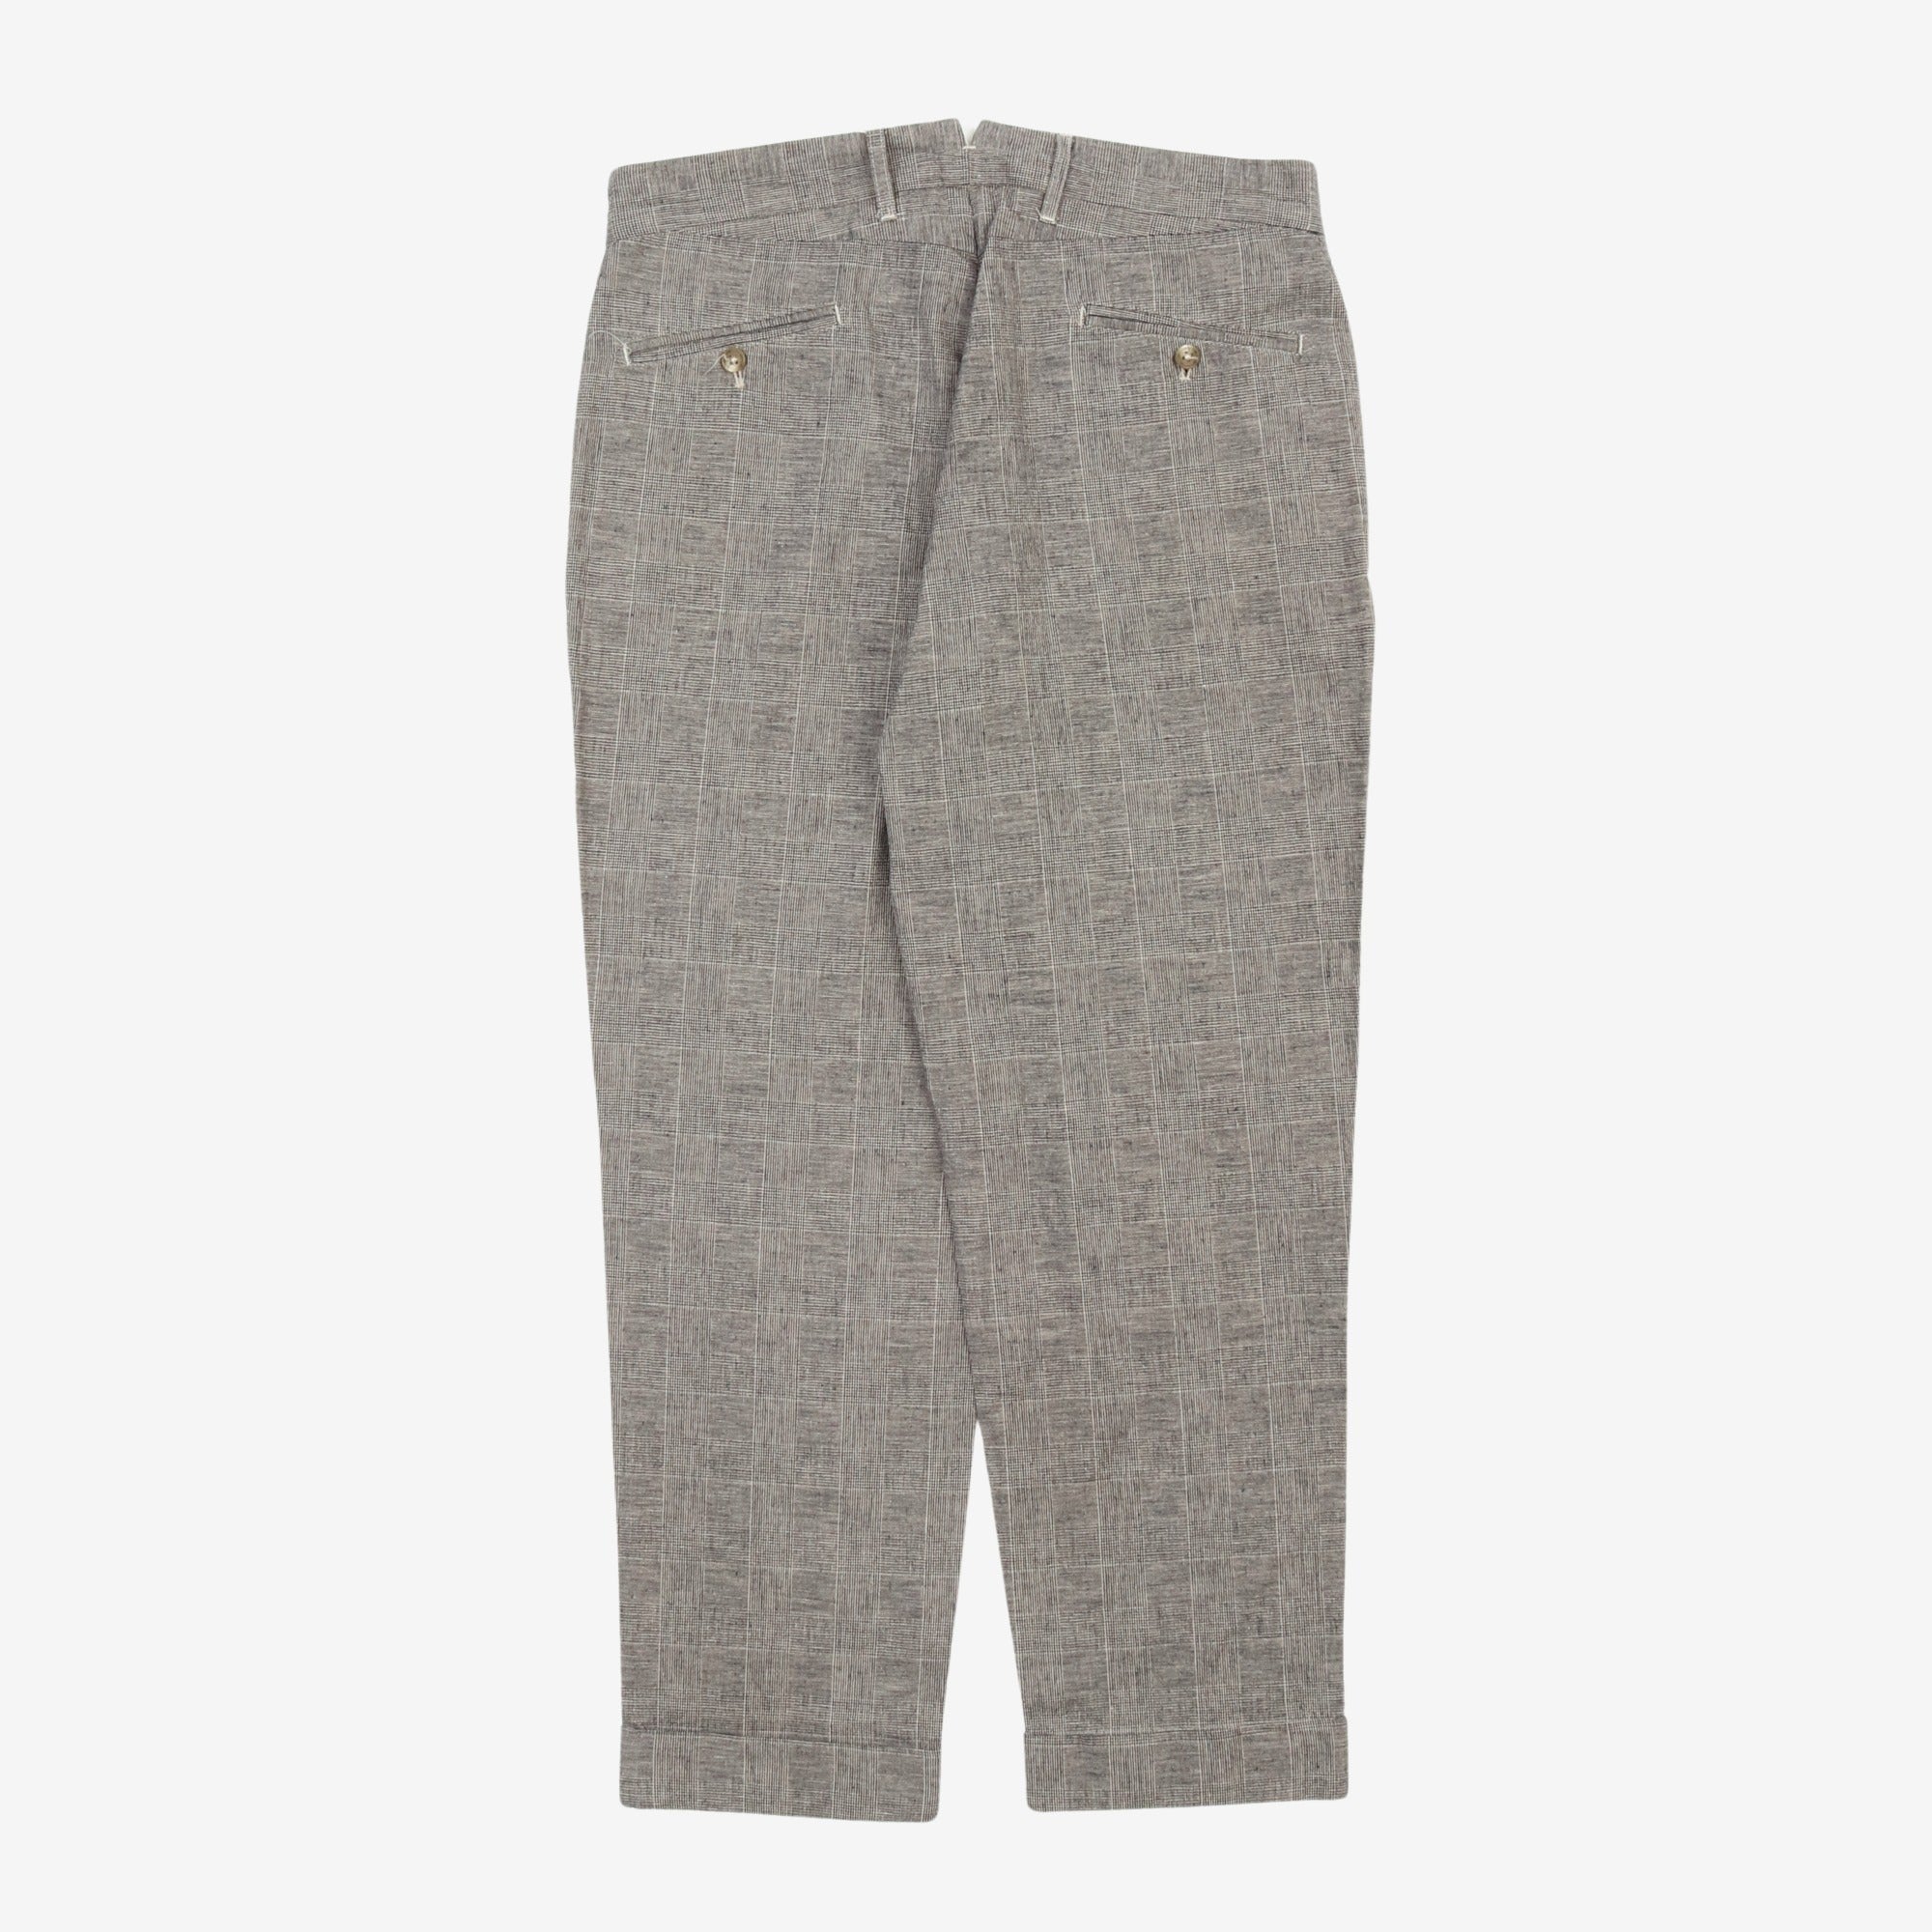 Formal Check Trousers (35W x 29L)